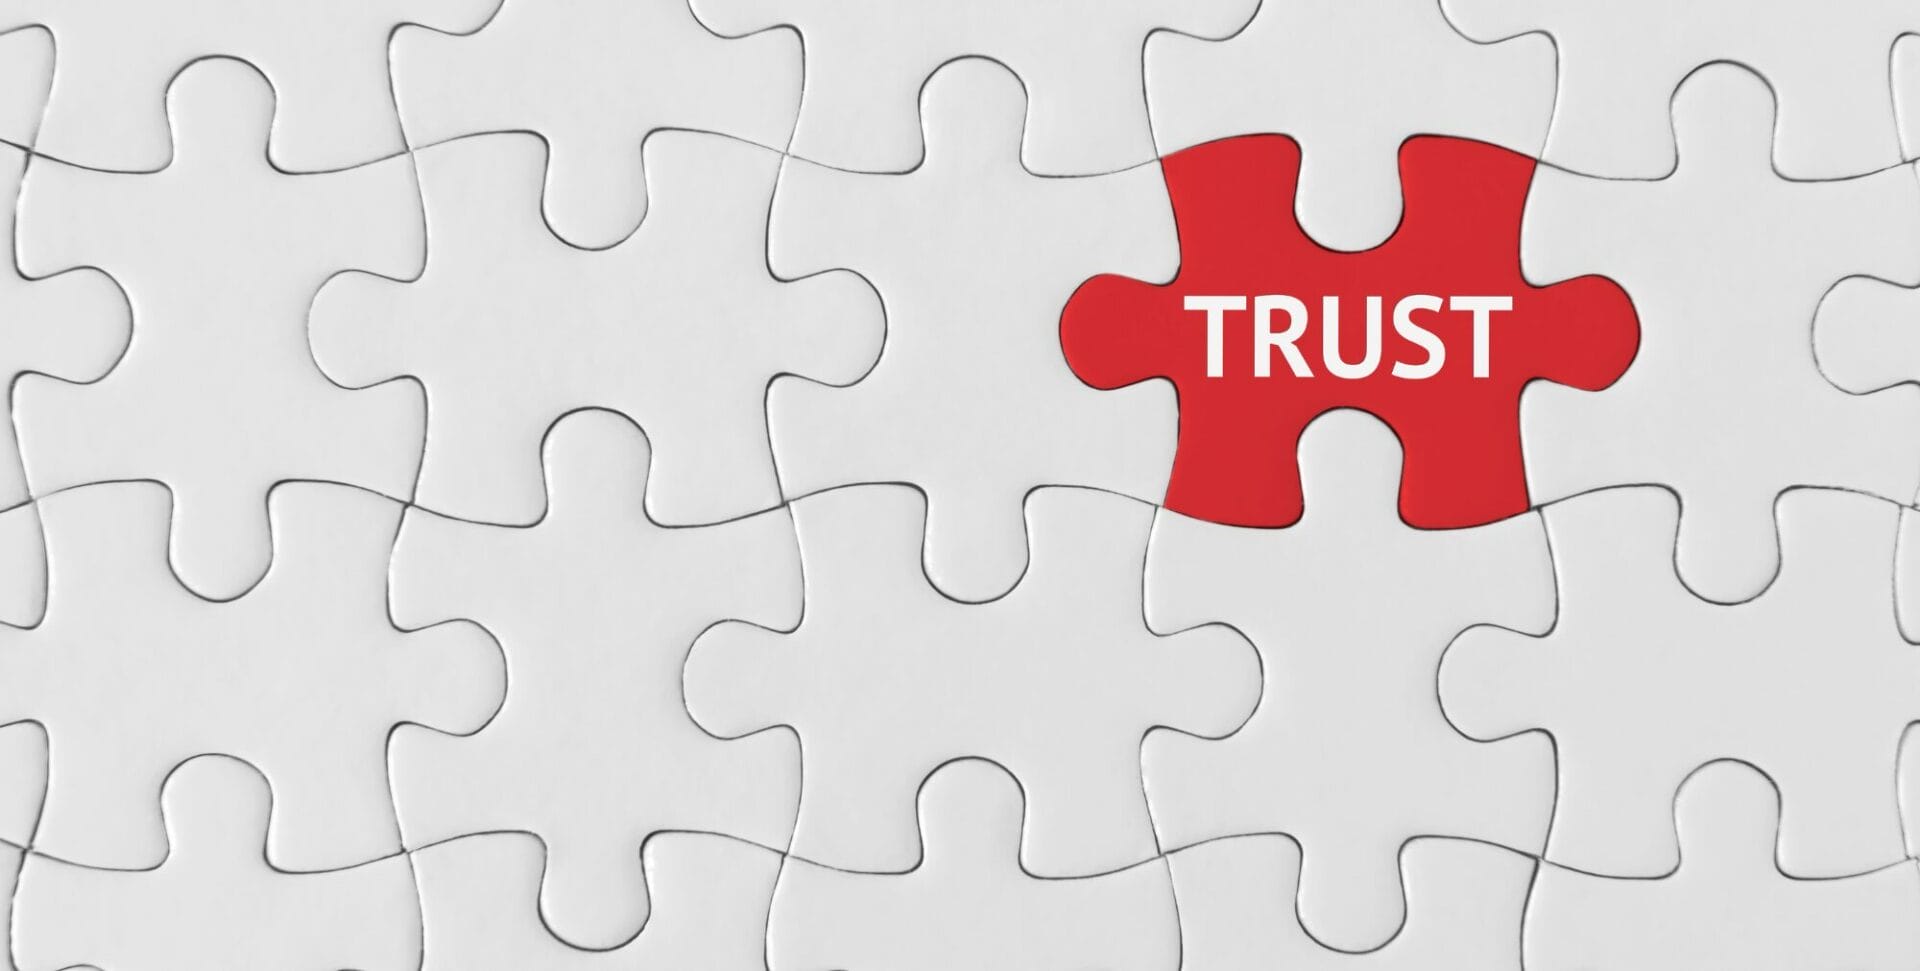 A white jigsaw with one red piece which has the word trust written on it